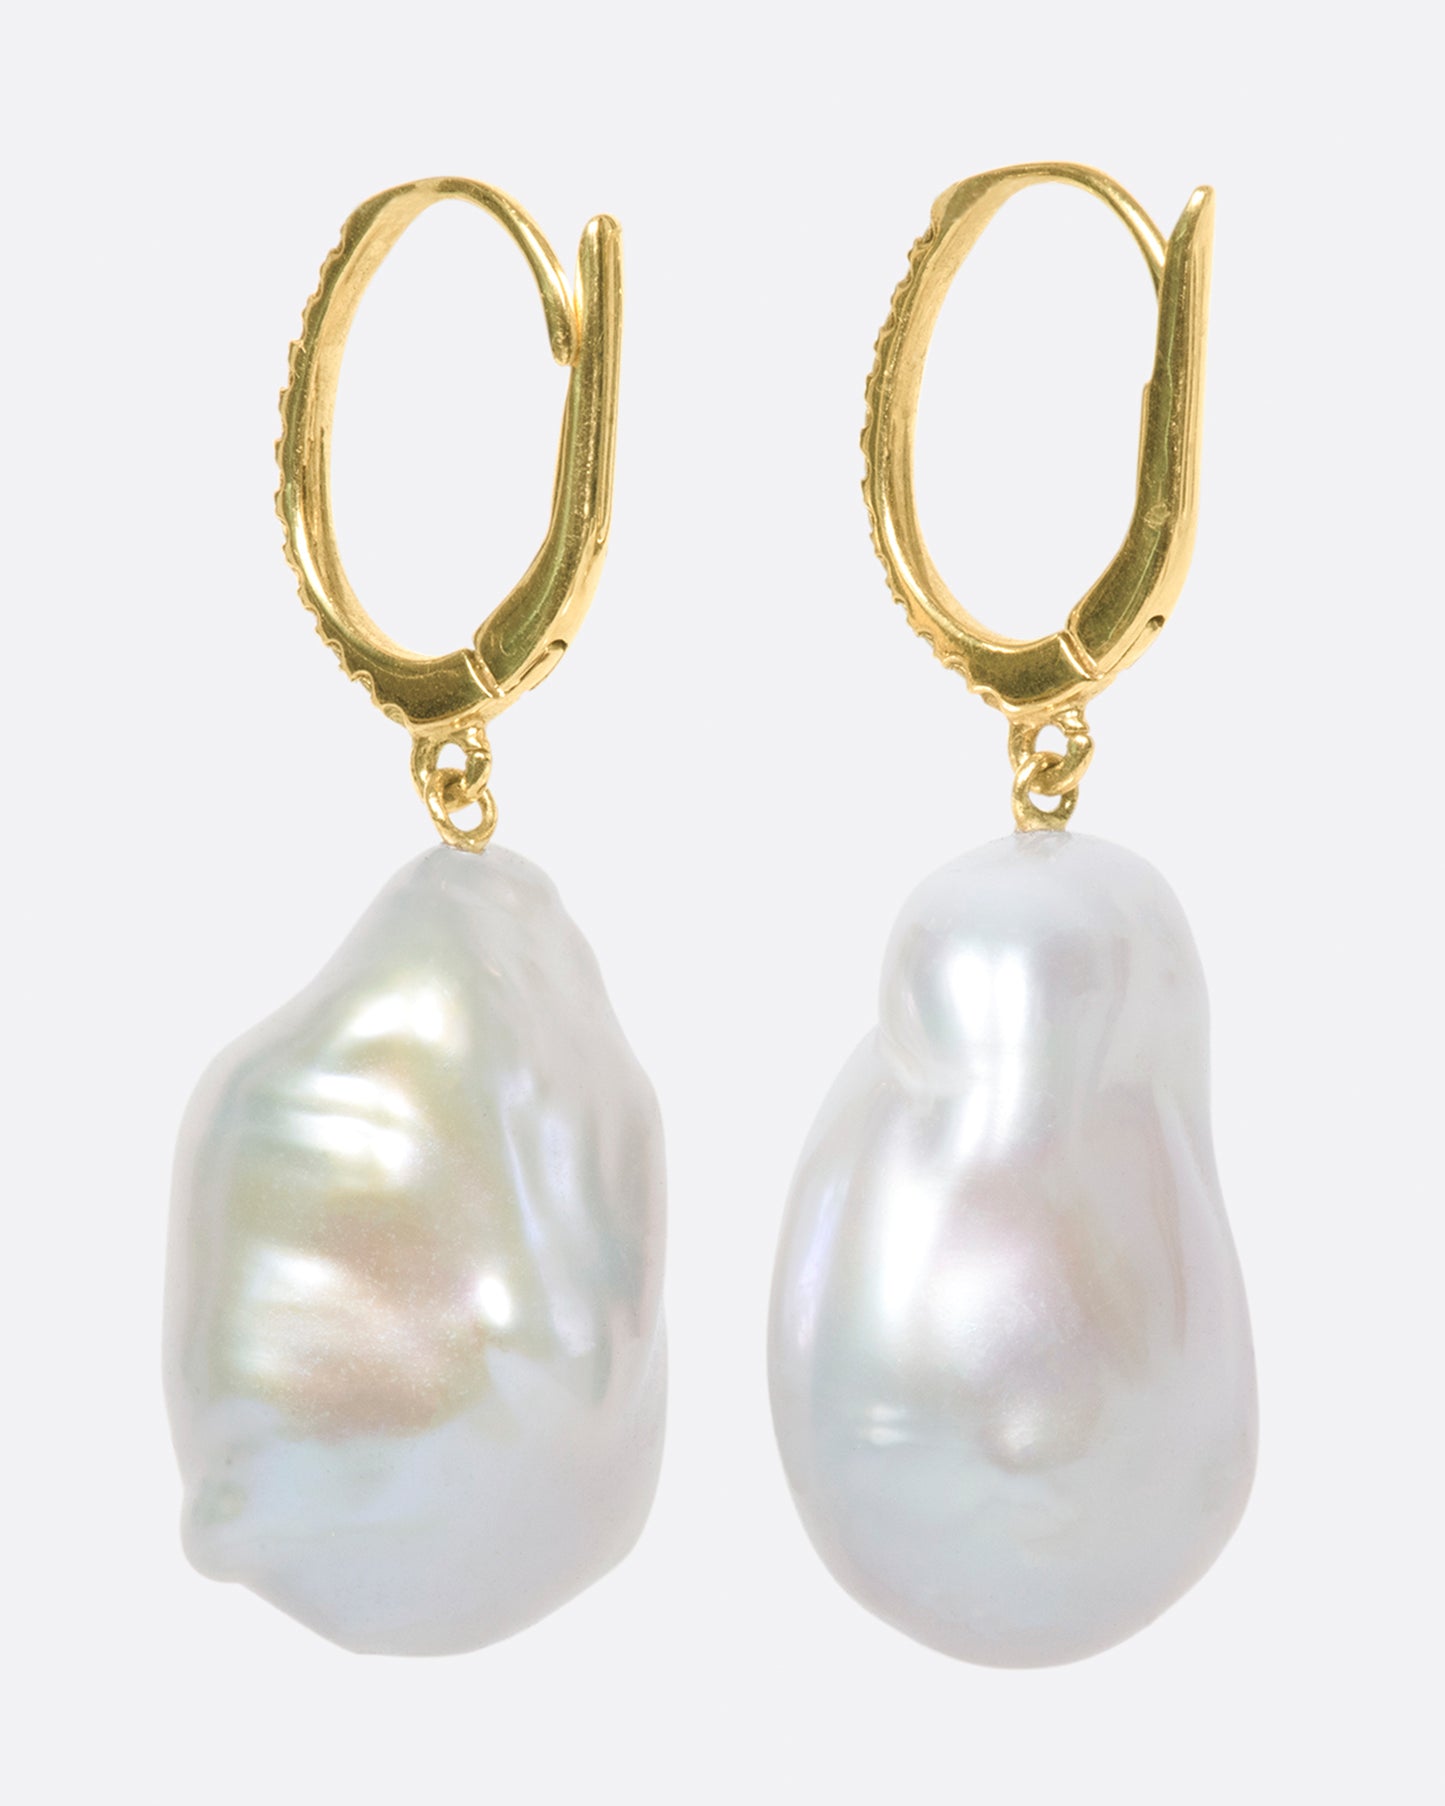 two dangle drop earrings hanging and viewed from the back. the drop is a pearl that has been partially carved out and lined with amethysts. the yellow gold hooks have pave diamonds on the bail.